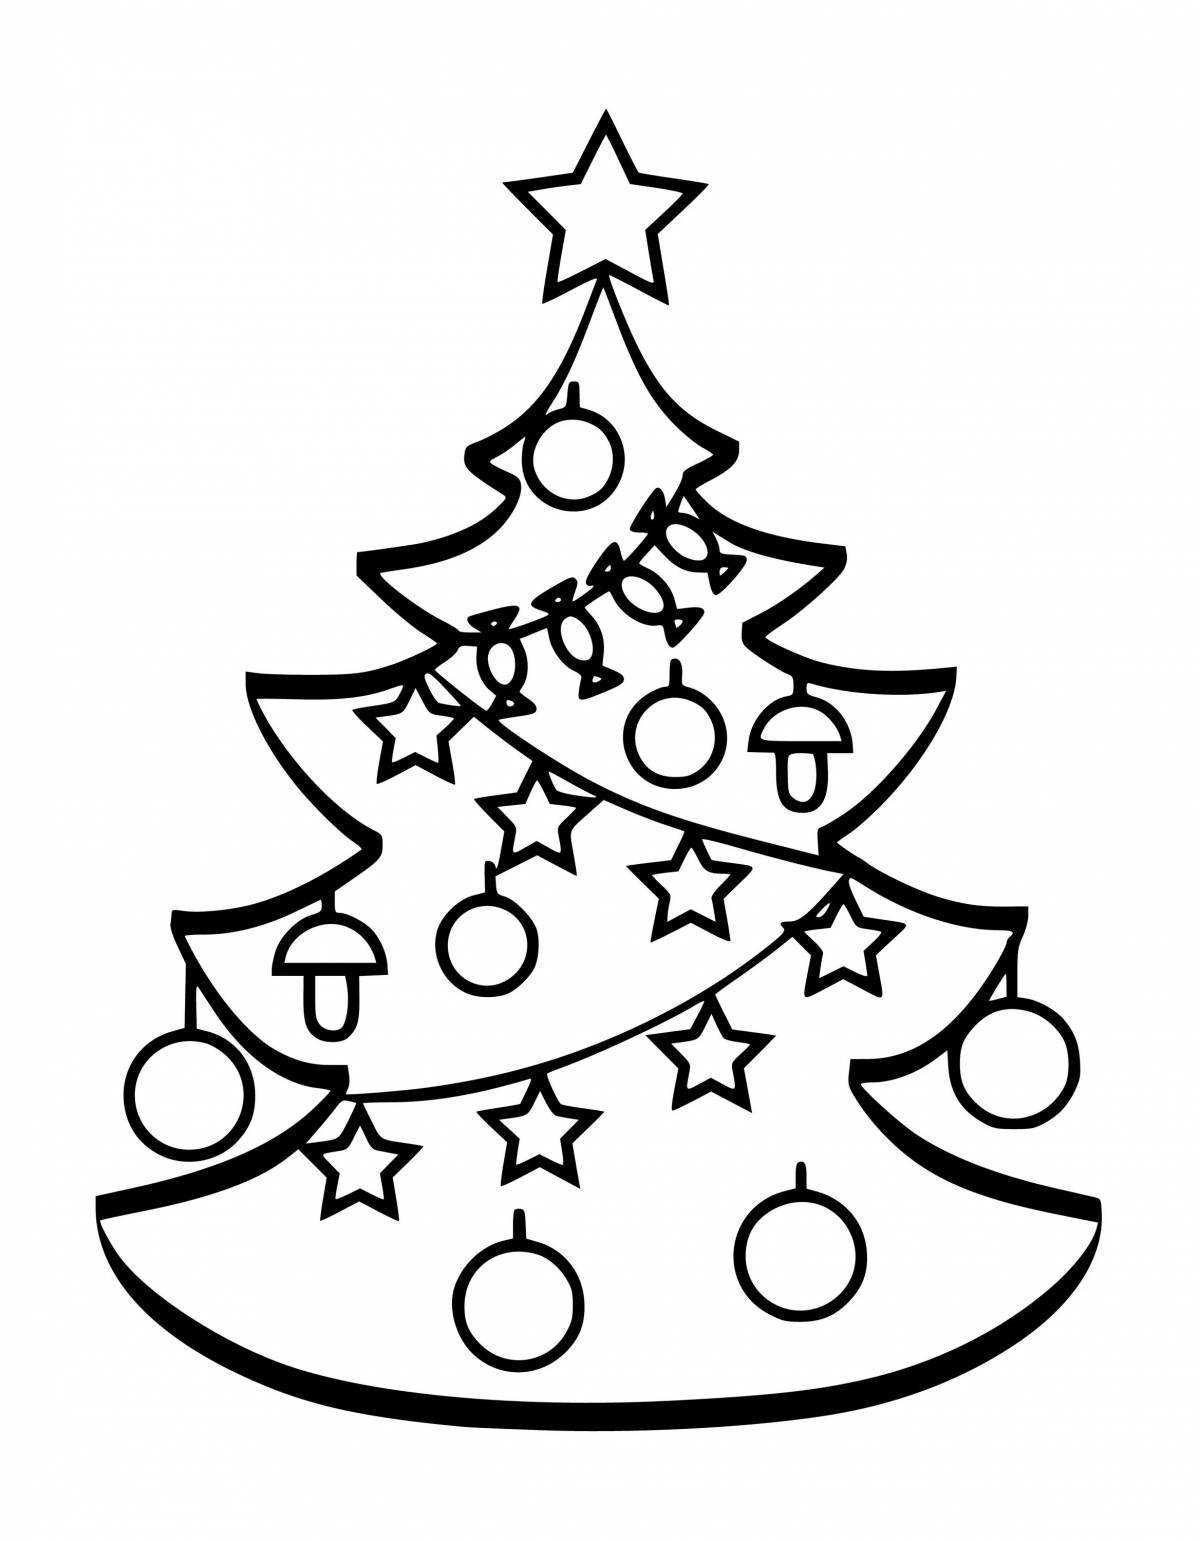 Sparkling Christmas tree coloring book for kids